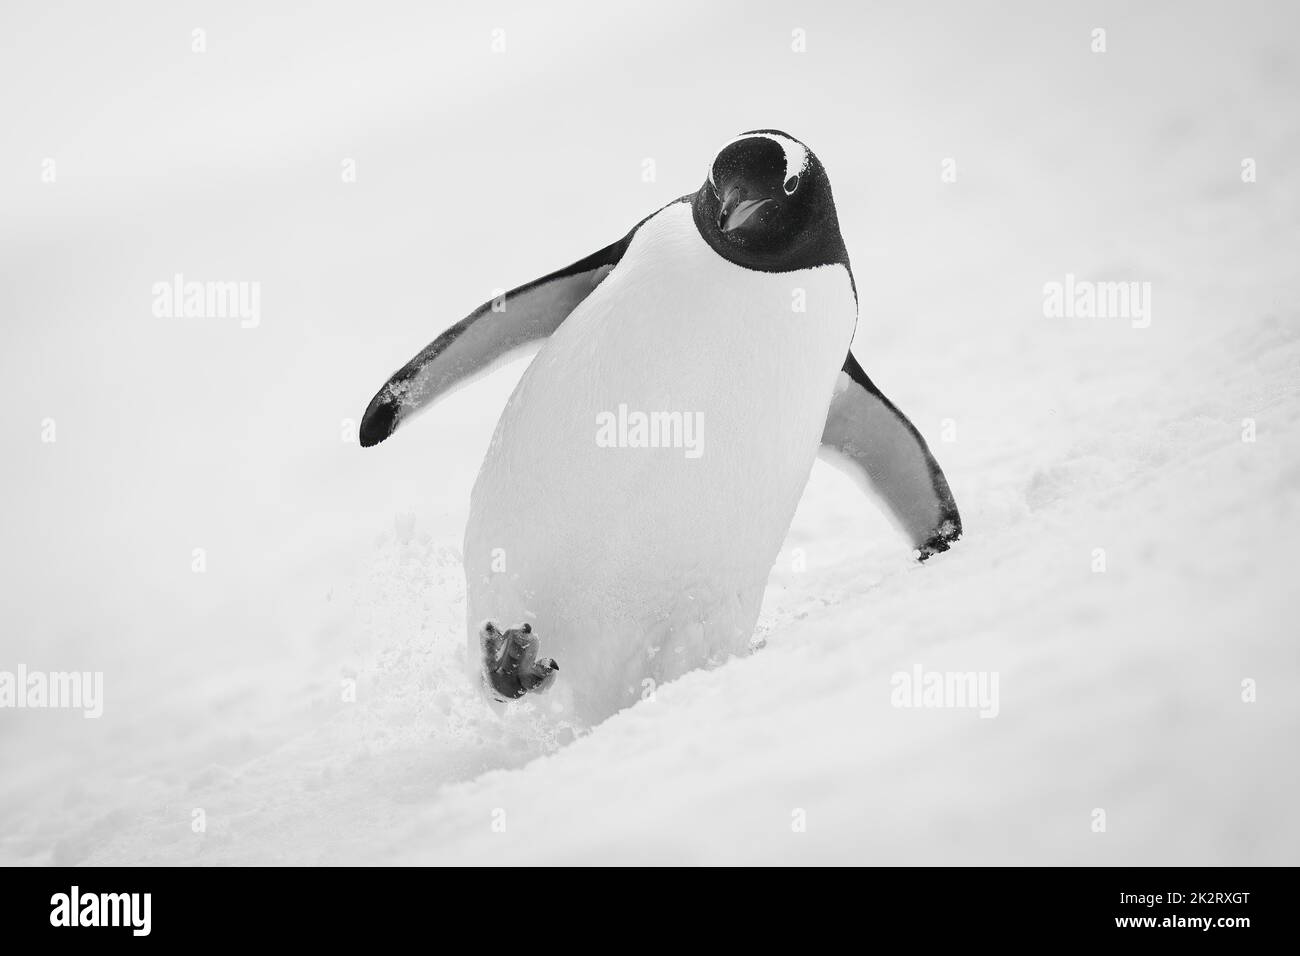 A gentoo penguin almost falls over as it waddles across a snowy slope, holding its flippers out for balance and raising its right foot. It has a white Stock Photo